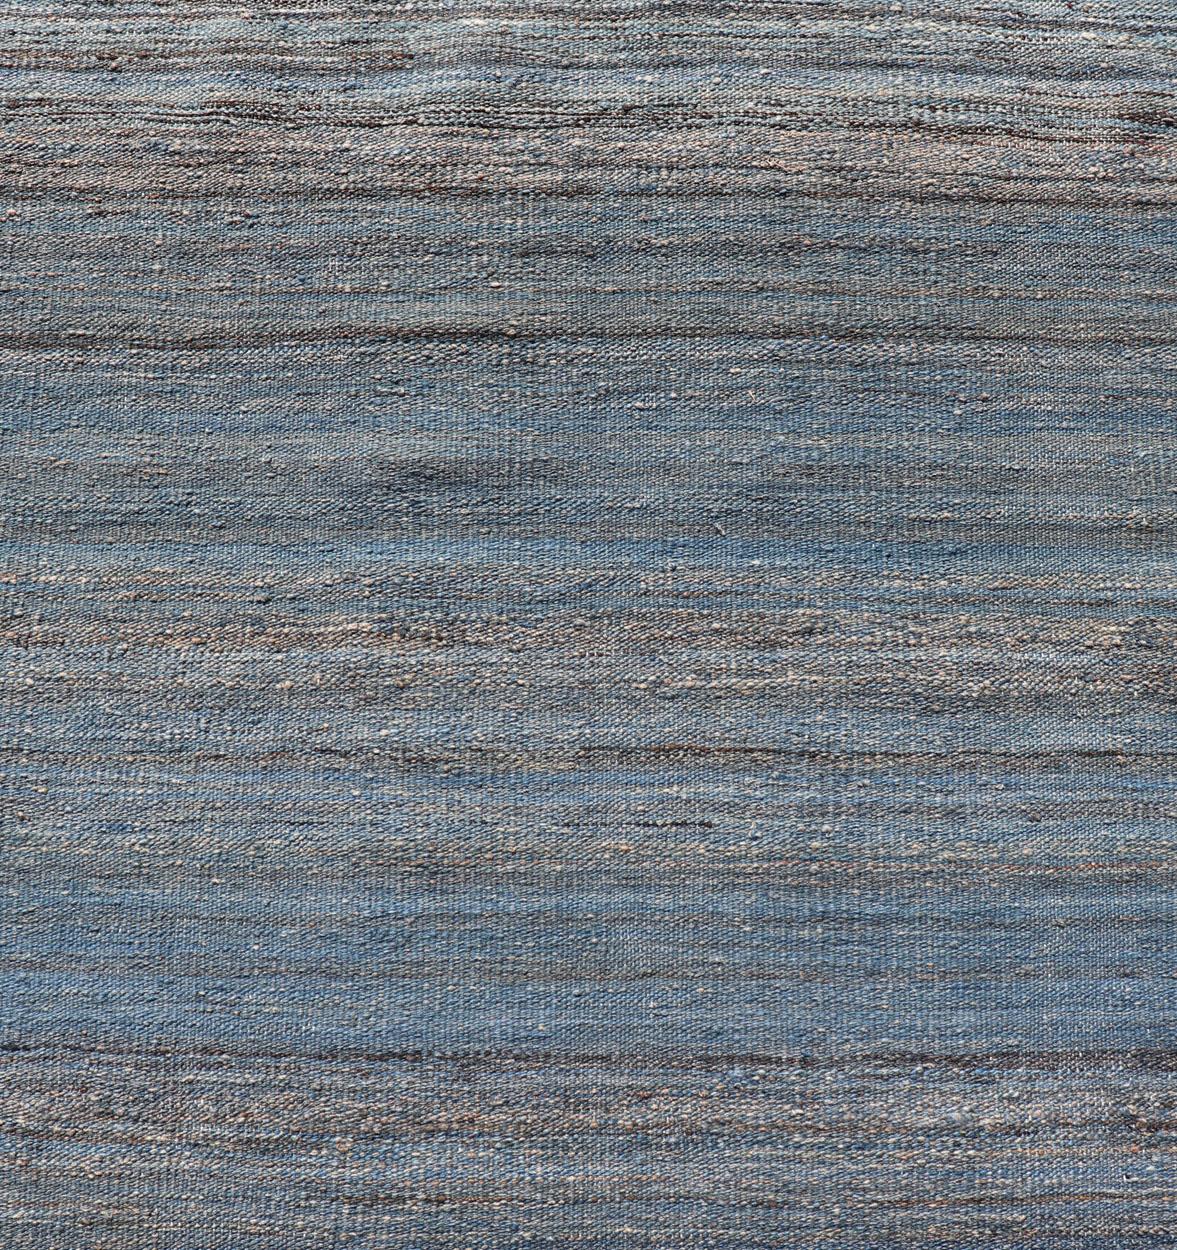 Runner Flat-Weave in Modern design in Shades of Blue, Green and Taupe For Sale 3